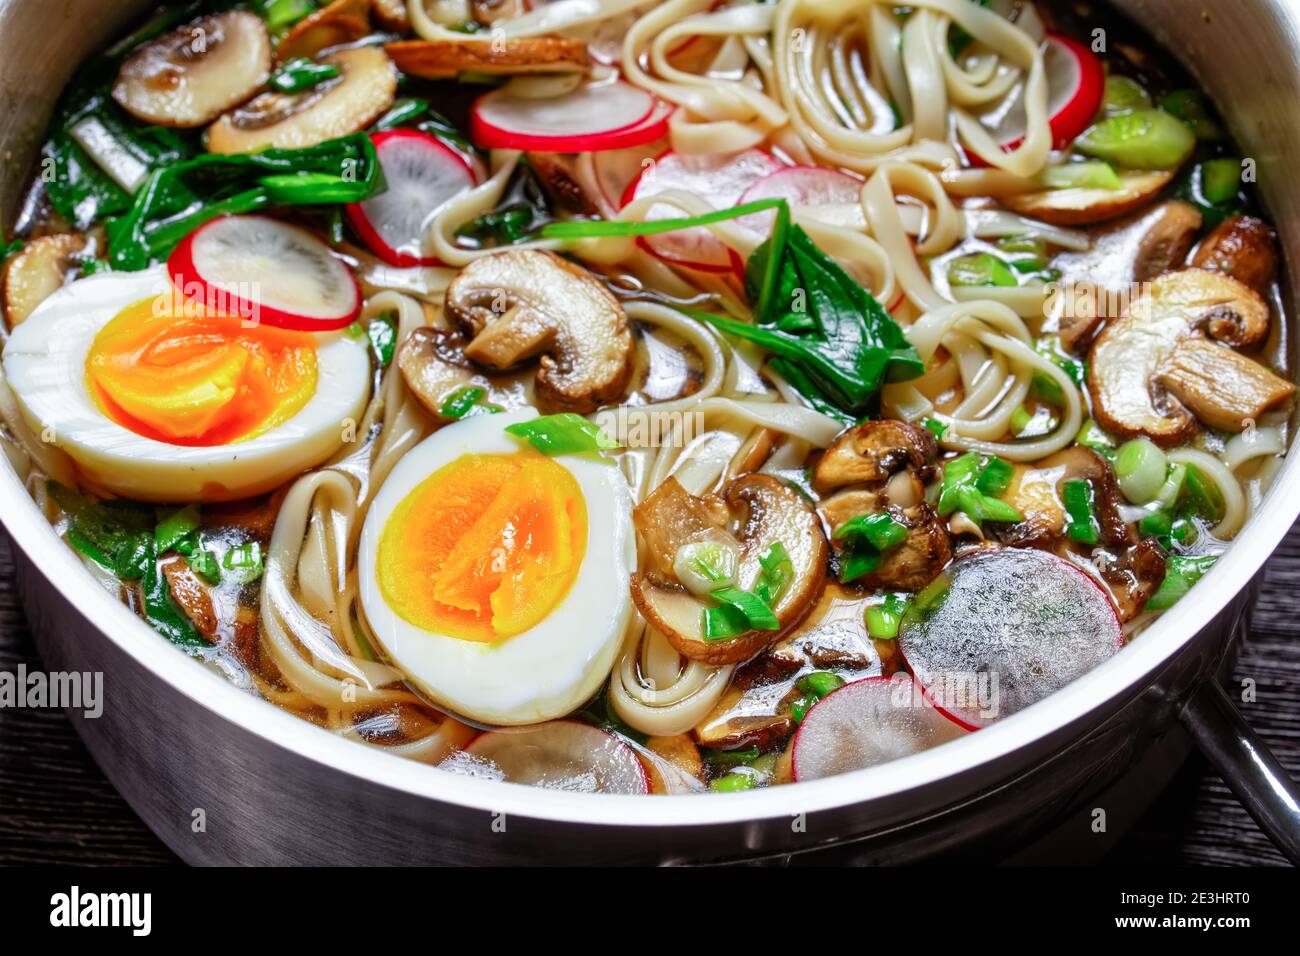 Hoto, Japanese Udon Noodles Hot Pot with Squash and Vegetables. Stock Photo  - Image of cuisine, radish: 230912058